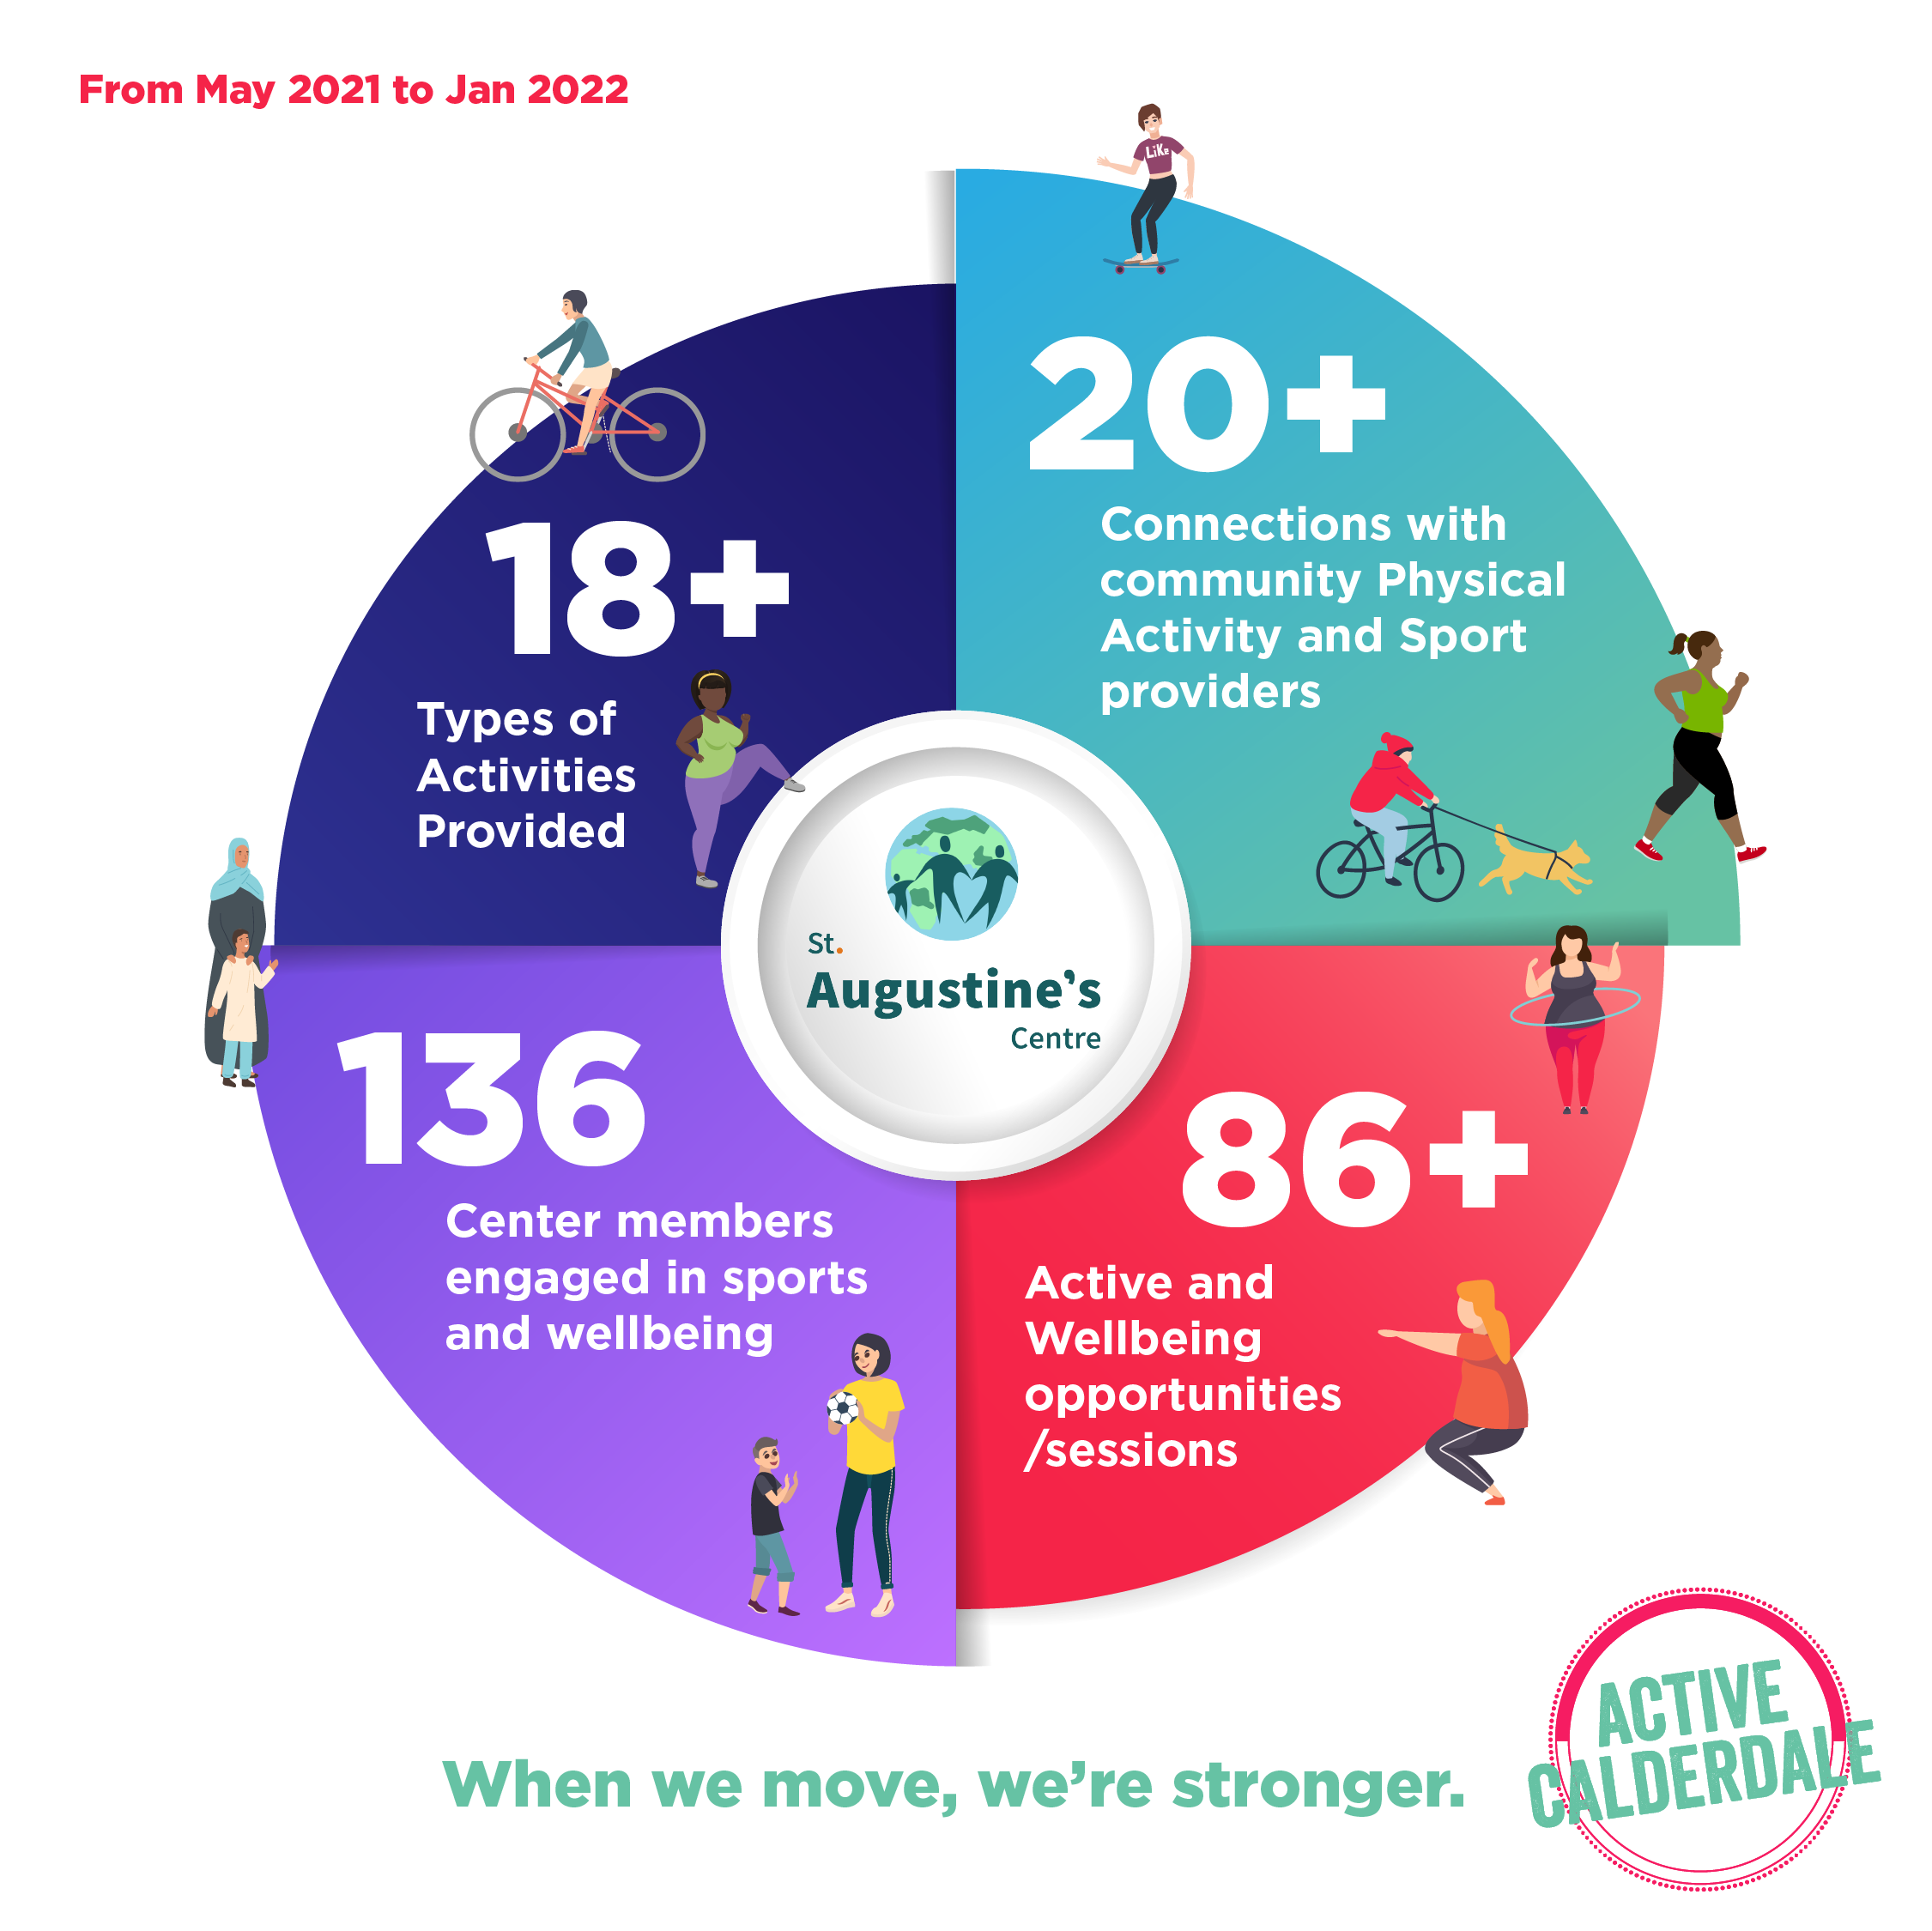 From May 2021 to Jan 2022:
18 plus types of activities provided, 20 plus connections with community physical activity and sport providers, 86 plus active and wellbeing opportunities/sessions, 136 centre members engaged in sports and wellbeing.
When we move we're stronger.